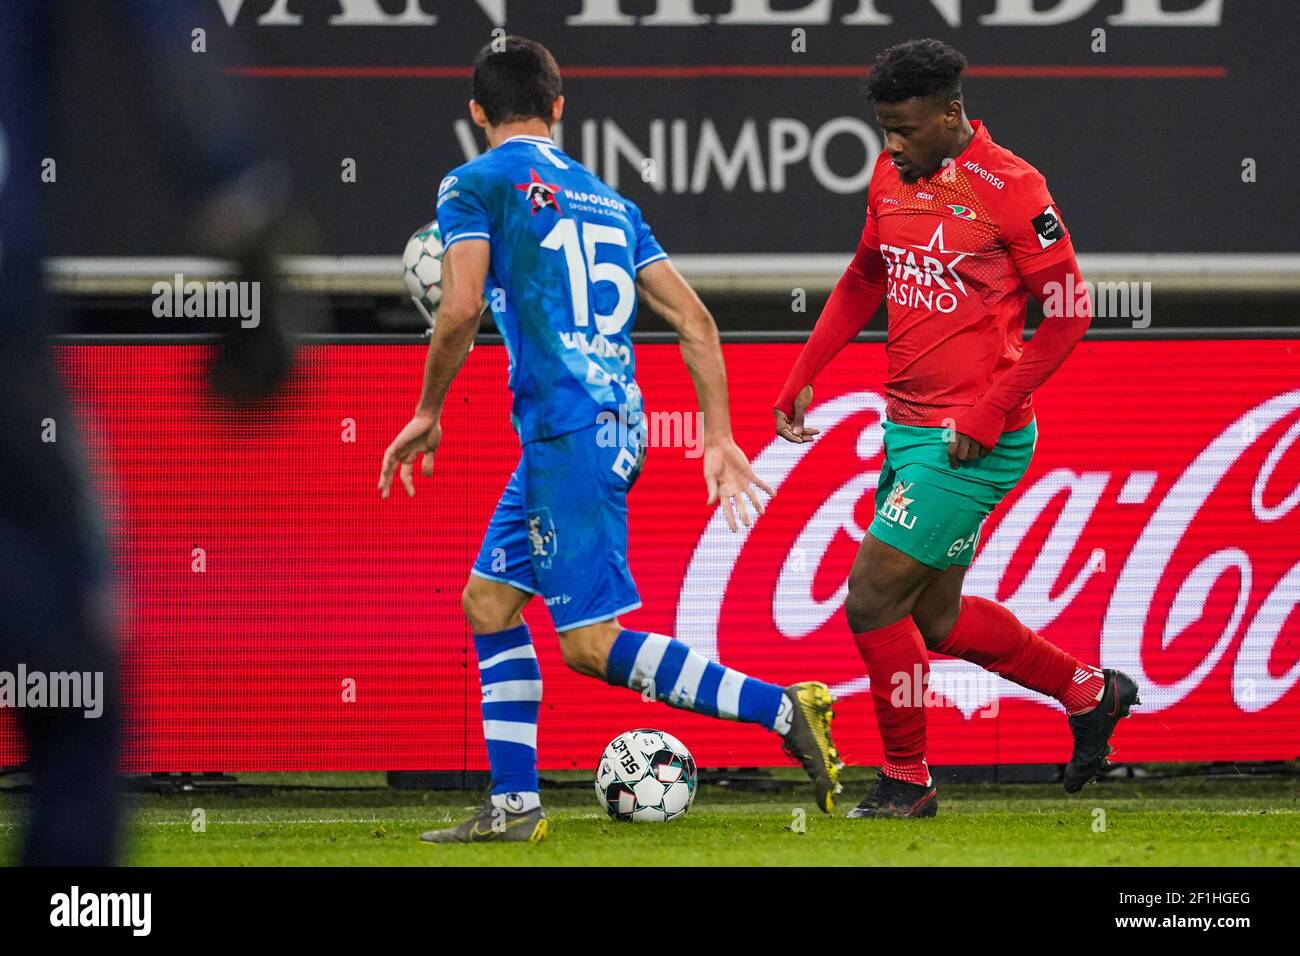 GENT, BELGIUM - MARCH 8: Mamadou Thiam of KV Oostende and Milad Mohammadi of KAA Gent during the Jupiler Pro League match between KAA Gent and KV Oost Stock Photo